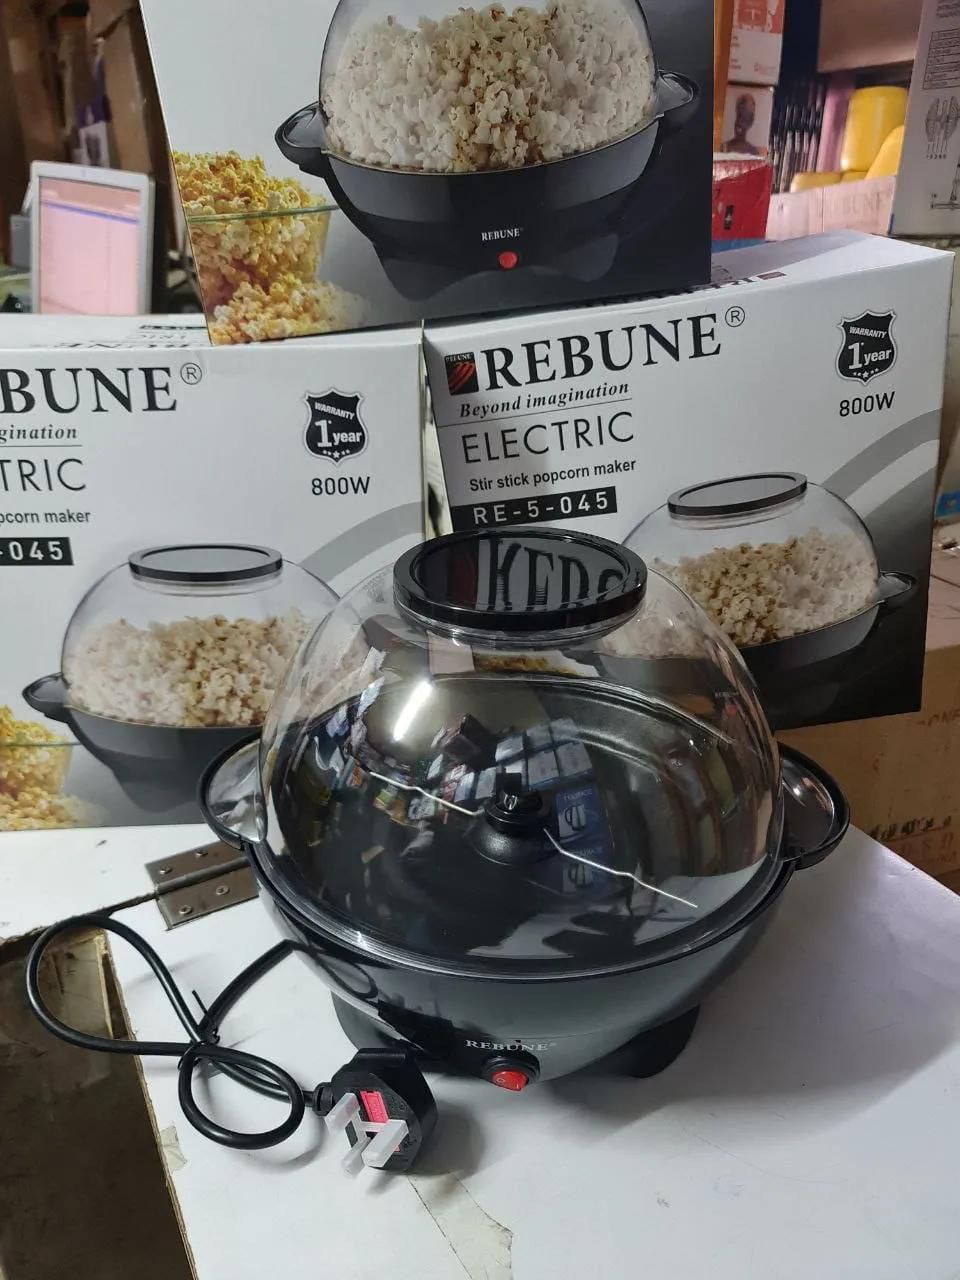 Rebune Electrical Popcorn Maker Healthy & Fat Free Popcorn Maker MachineHealthy Homemade Snacks: Enjoy guilt-free popcorn with hot air cooking, no need for oil. Retro Design: Add a